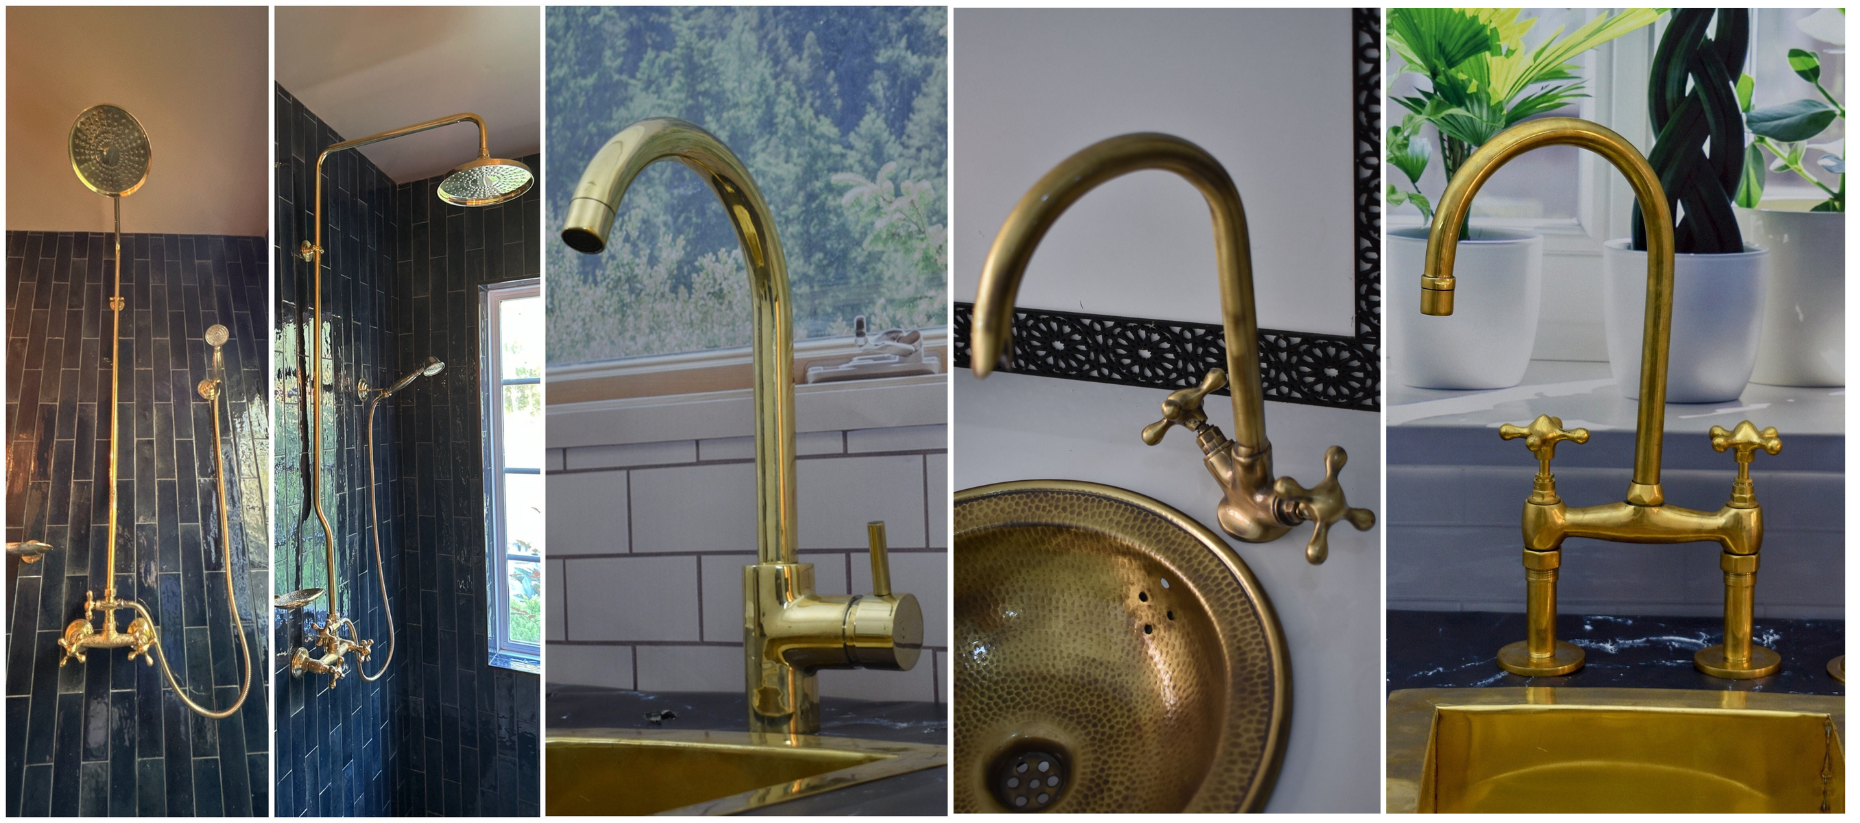 unlacquered brass,Bathroom Faucet,brass hardware,Wall mounted faucet,Wash Your Hands,Vintage Faucet,Bathroom Sink